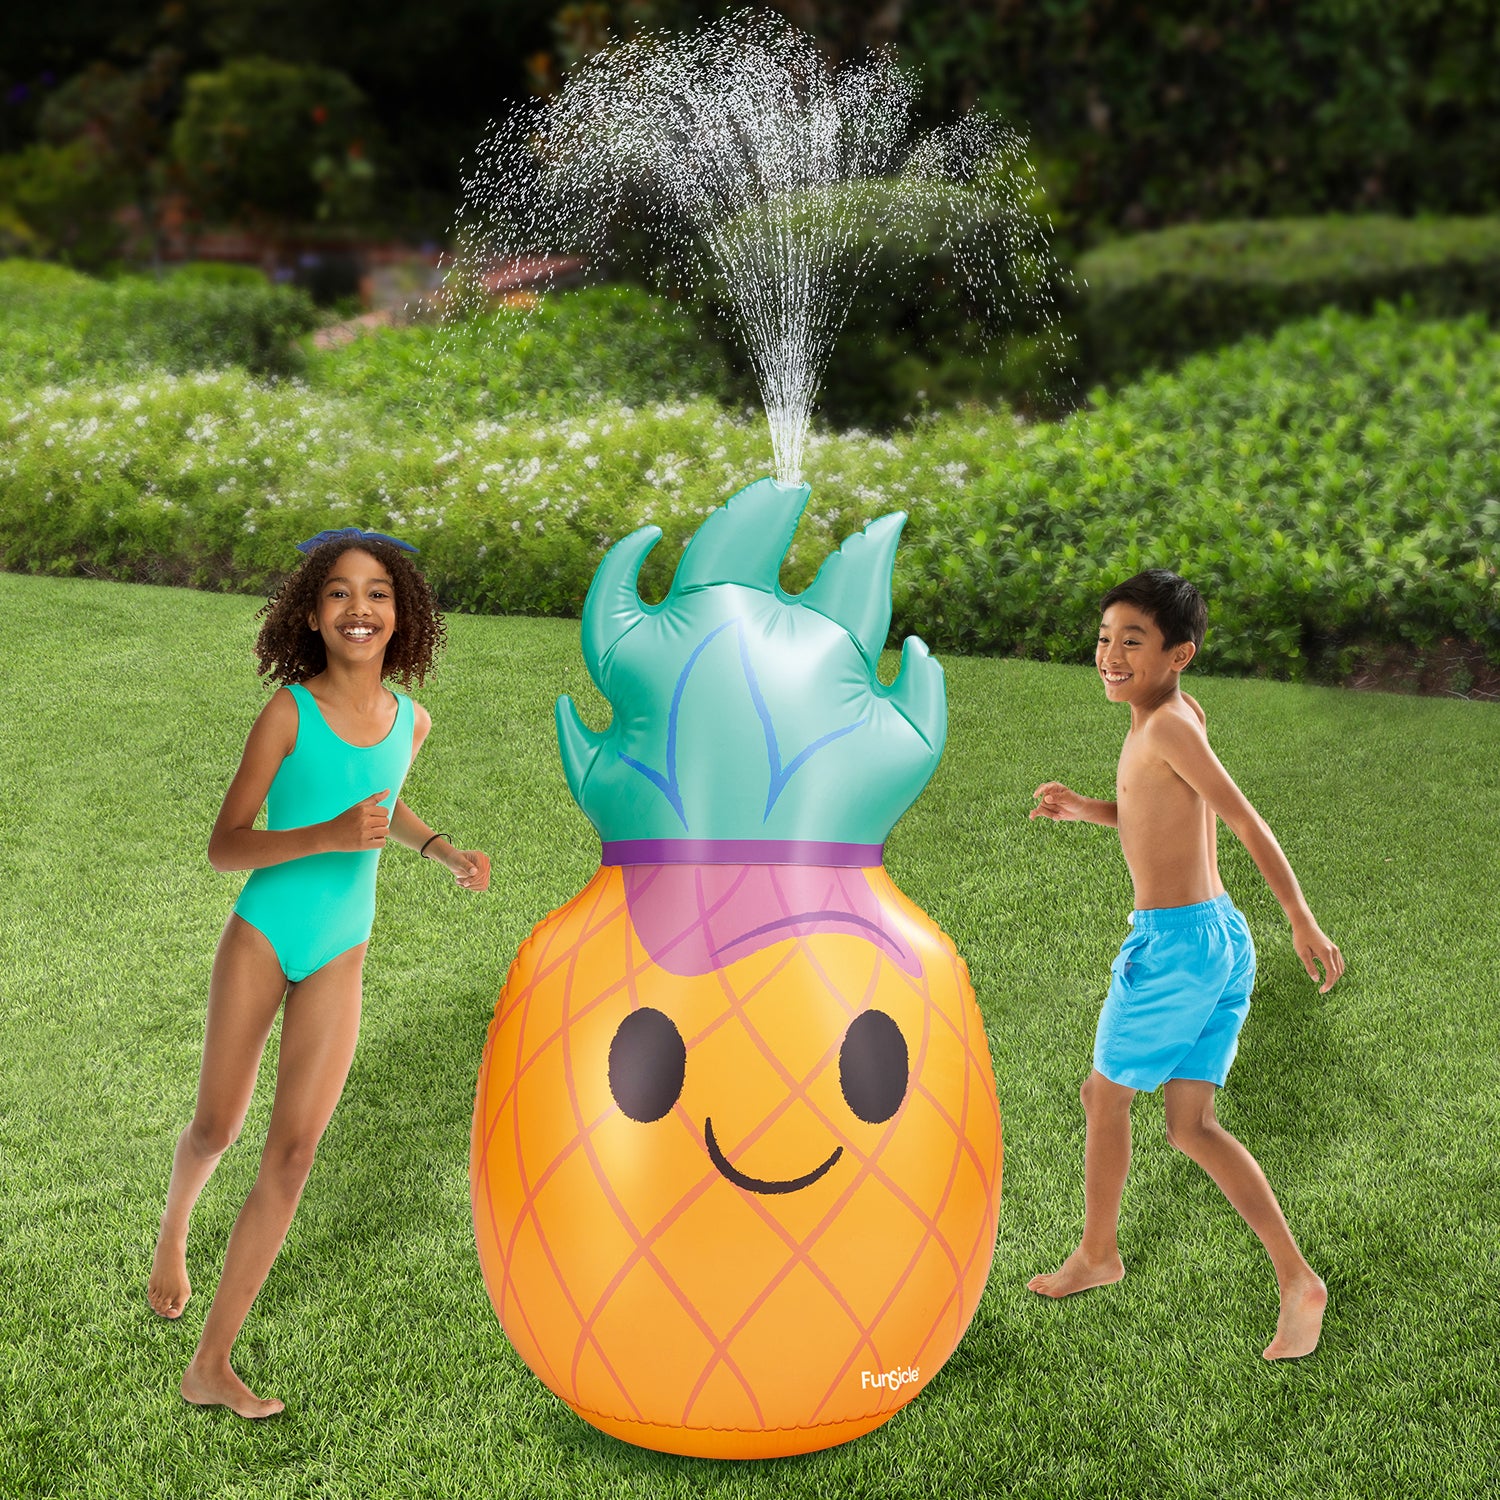 Funsicle Groovy Pineapple Sprinkler with two models around it on a grass background